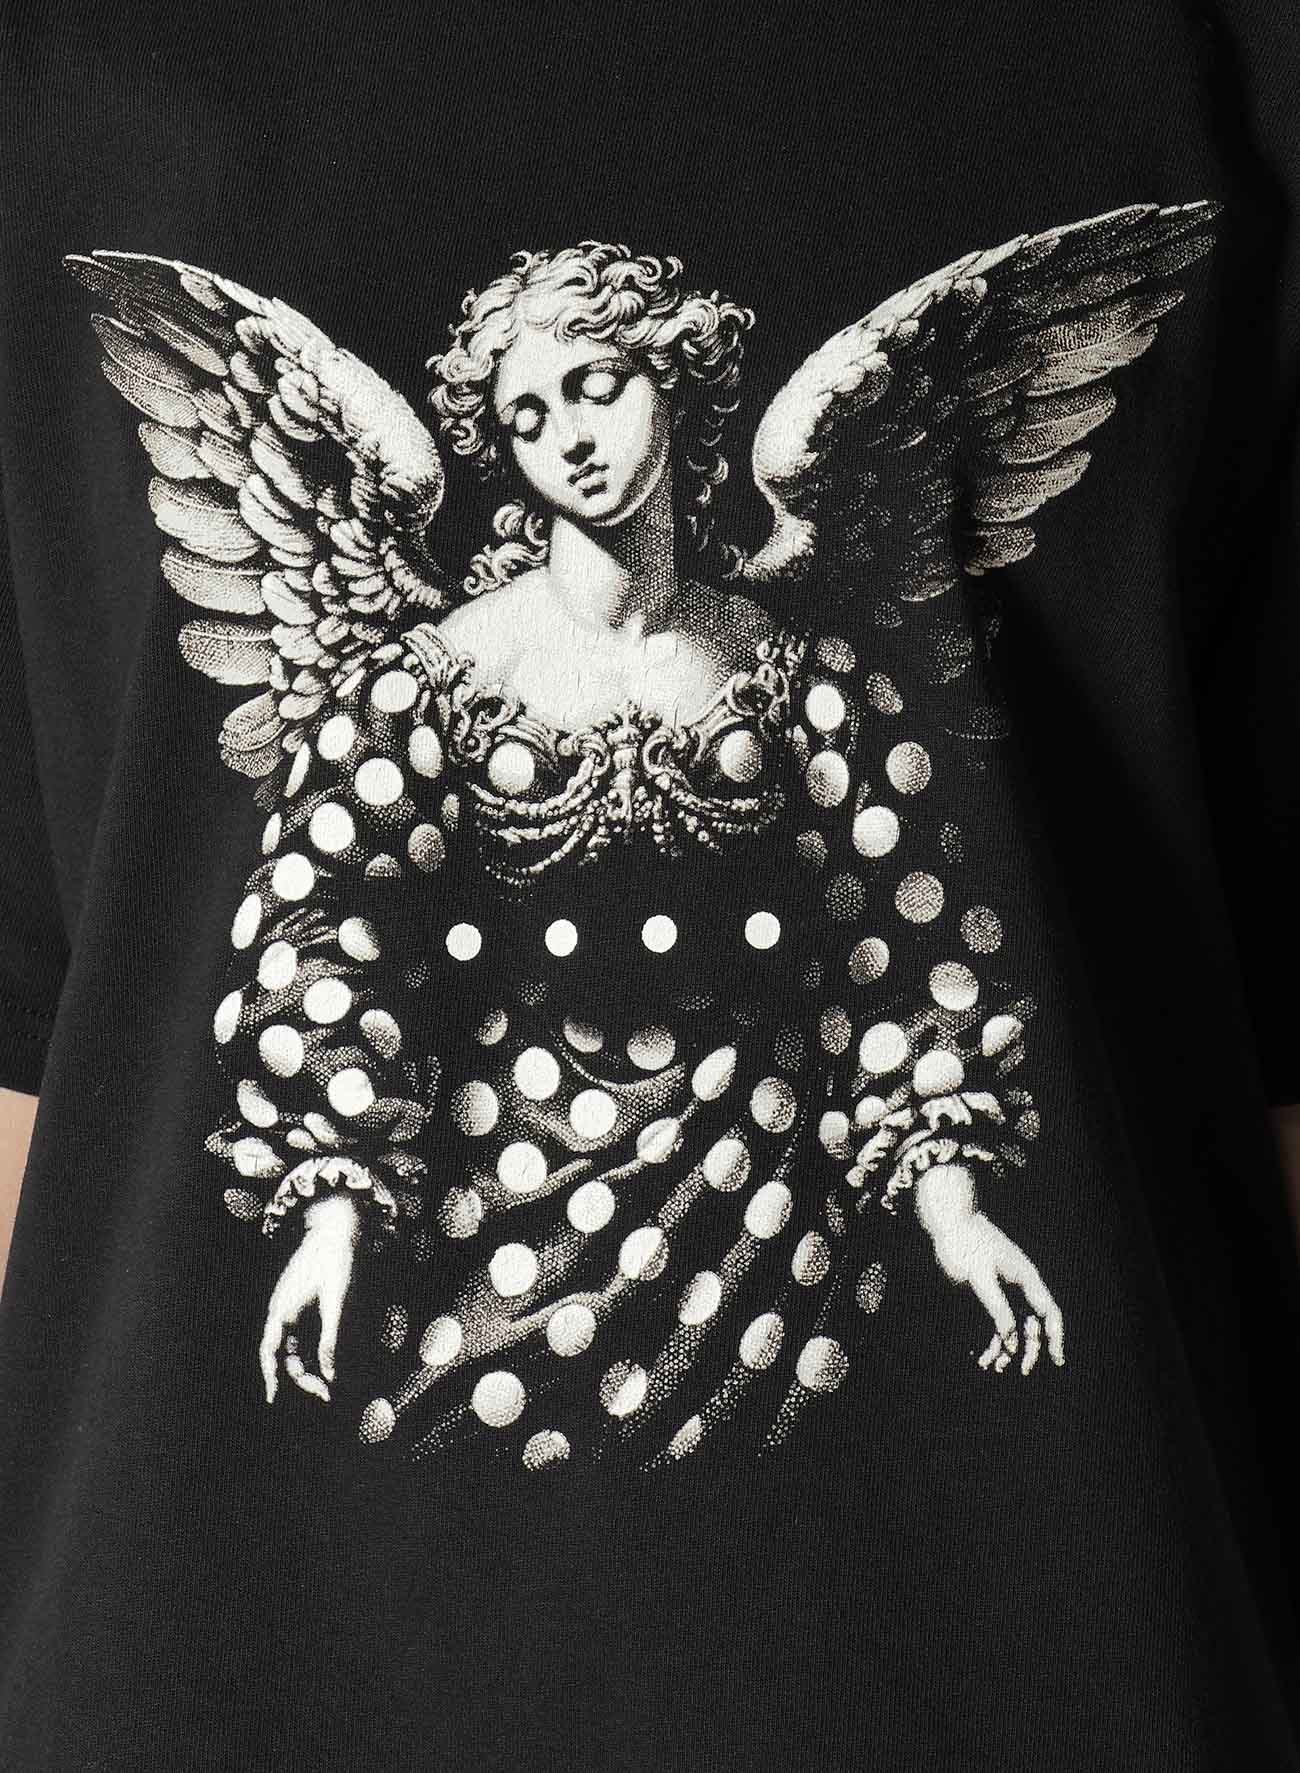 【7/17 12:00(JST) Release】ANGEL PRINTED T-SHIRT B